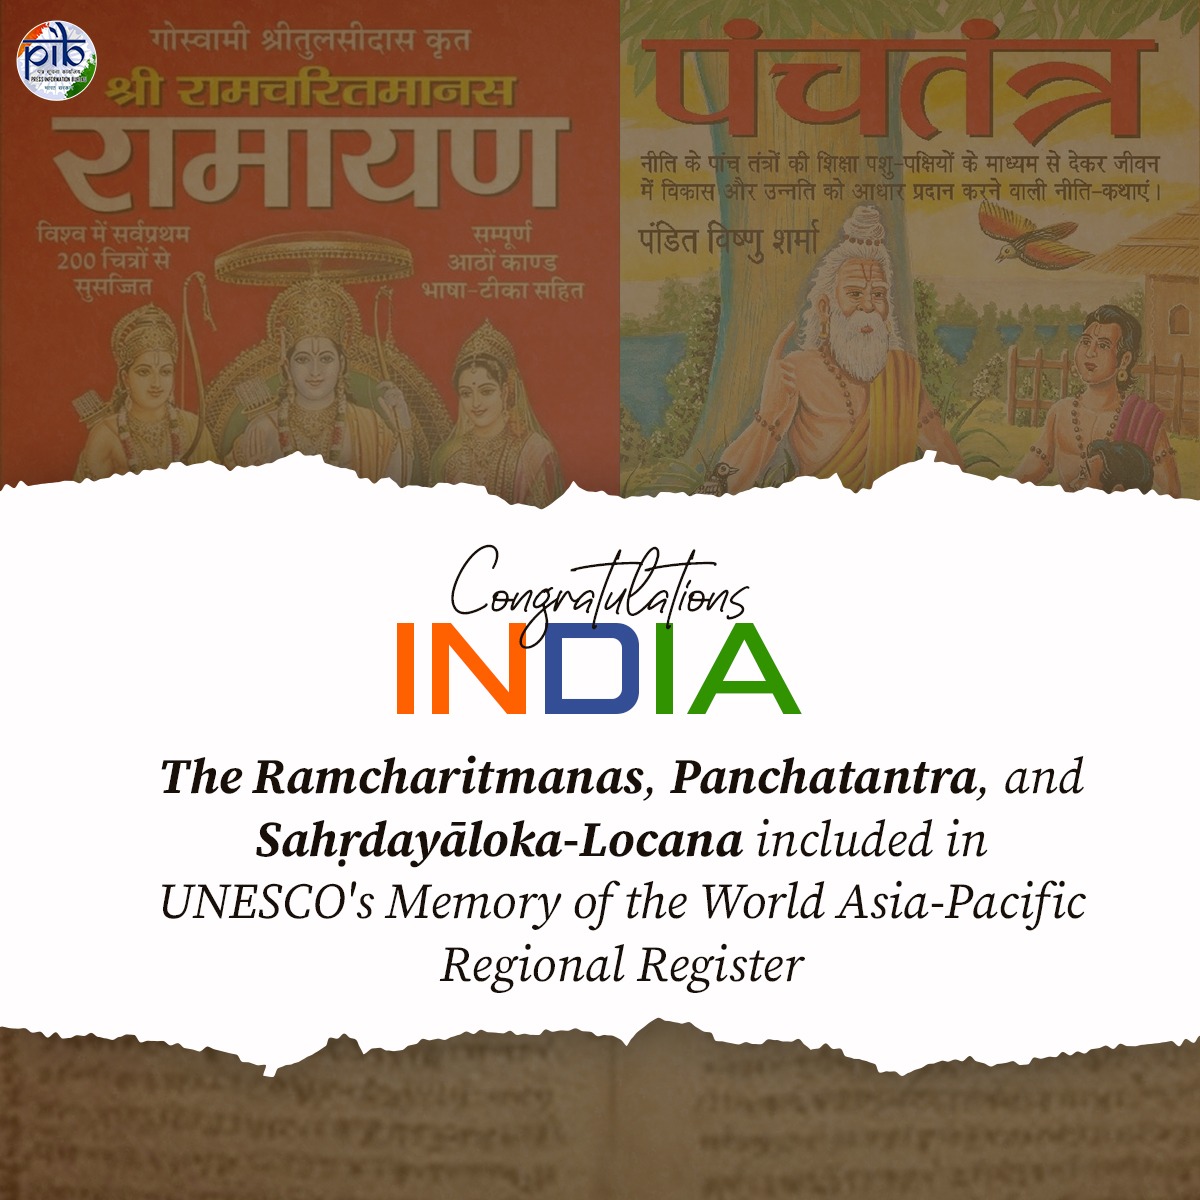 🇮🇳 PROUD MOMENT FOR INDIA 🇮🇳 The Ramcharitmanas, Panchatantra, and Sahṛdayāloka-Locana enter ‘UNESCO's Memory of the World Asia-Pacific Regional Register’